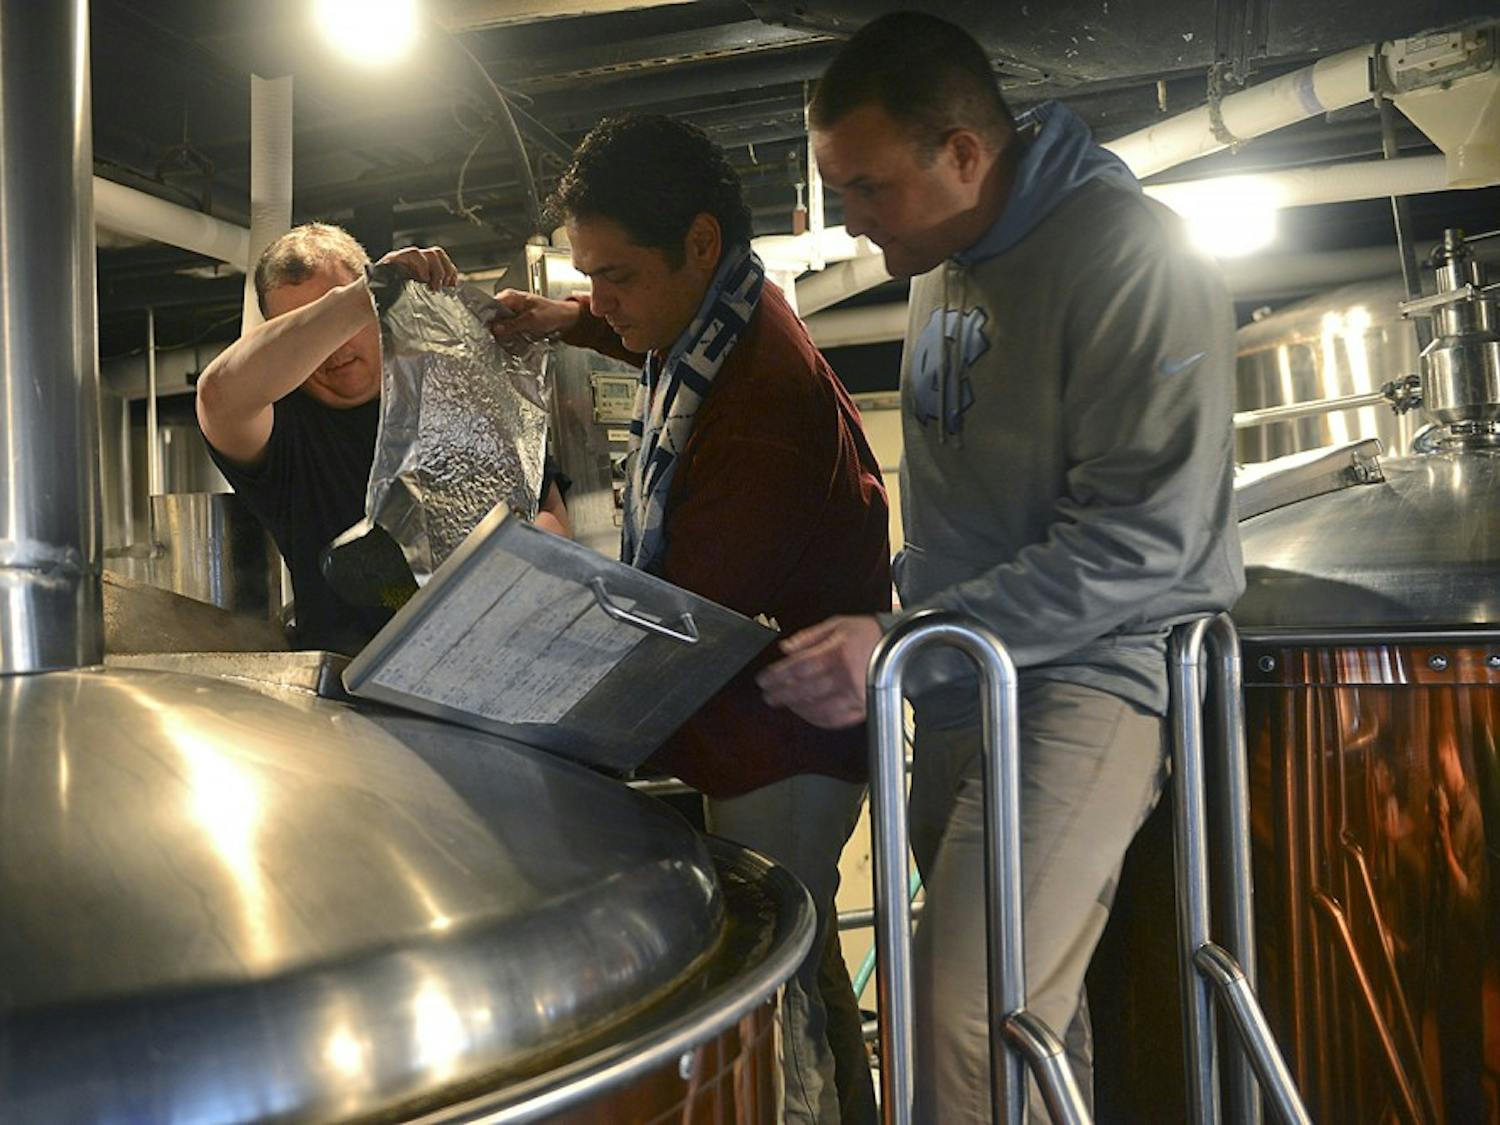 Chapel Hill mayor Mark Kleinschmidt pours hops into the Triangle Brewing Company's special game day brew for the first annual competition between the Top of the Hill and the Triangle Brewing Company Co-owner Rick Tufts (left) and co-brewmaster Aaron Caracci (right) supervise the process.